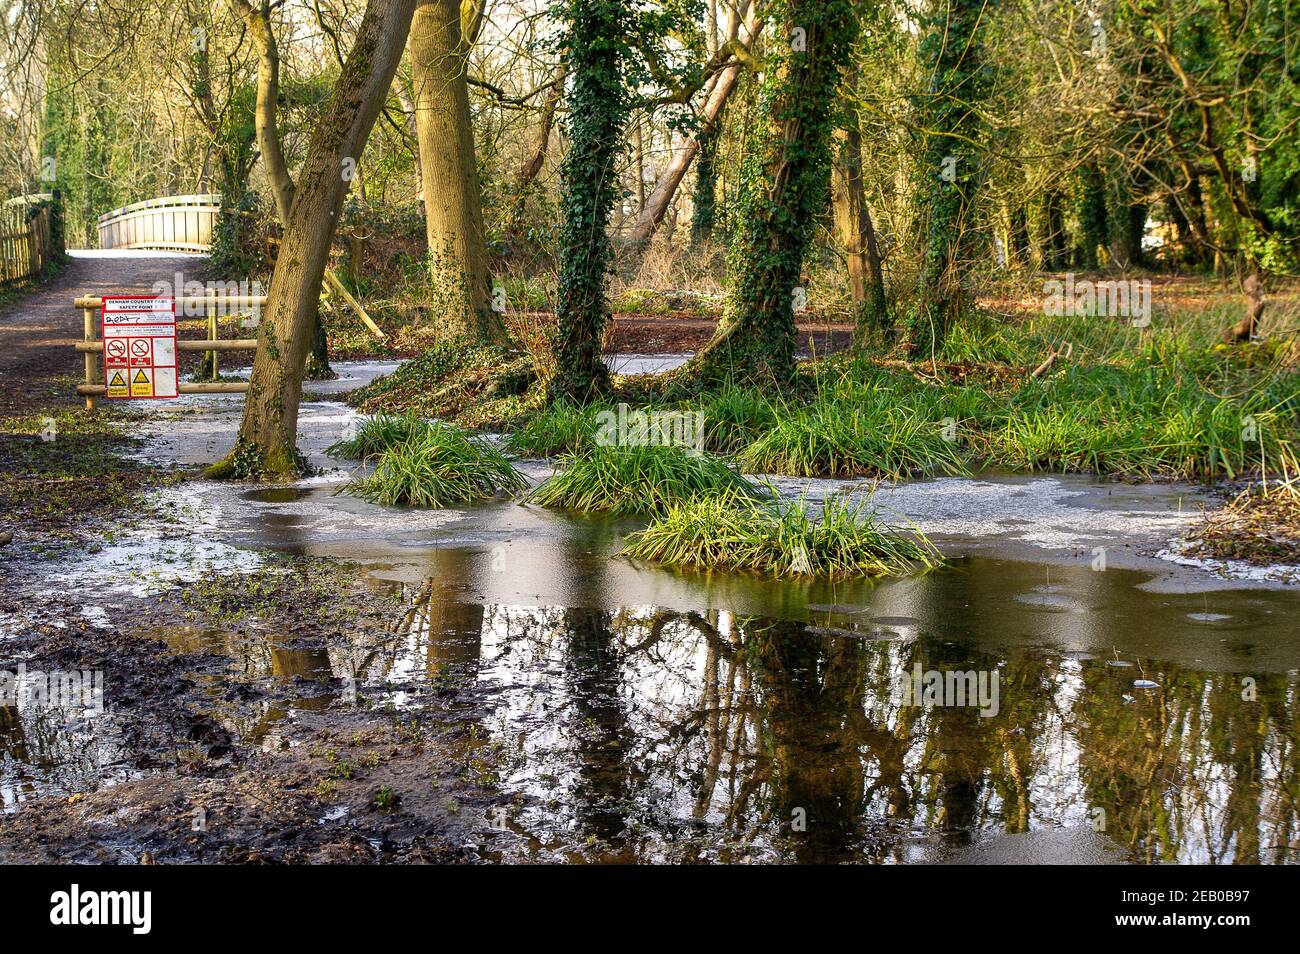 Denham, Buckinghamshire, UK. 11th February, 2021. Frozen water in Denham Country Park. Following recent heavy rainfall the River Colne in Denham Country Park has burst its banks. Due to sustained freezing temperatures, both patches of snow and flooding remain in parts of the park. Credit: Maureen McLean/Alamy Live News Stock Photo